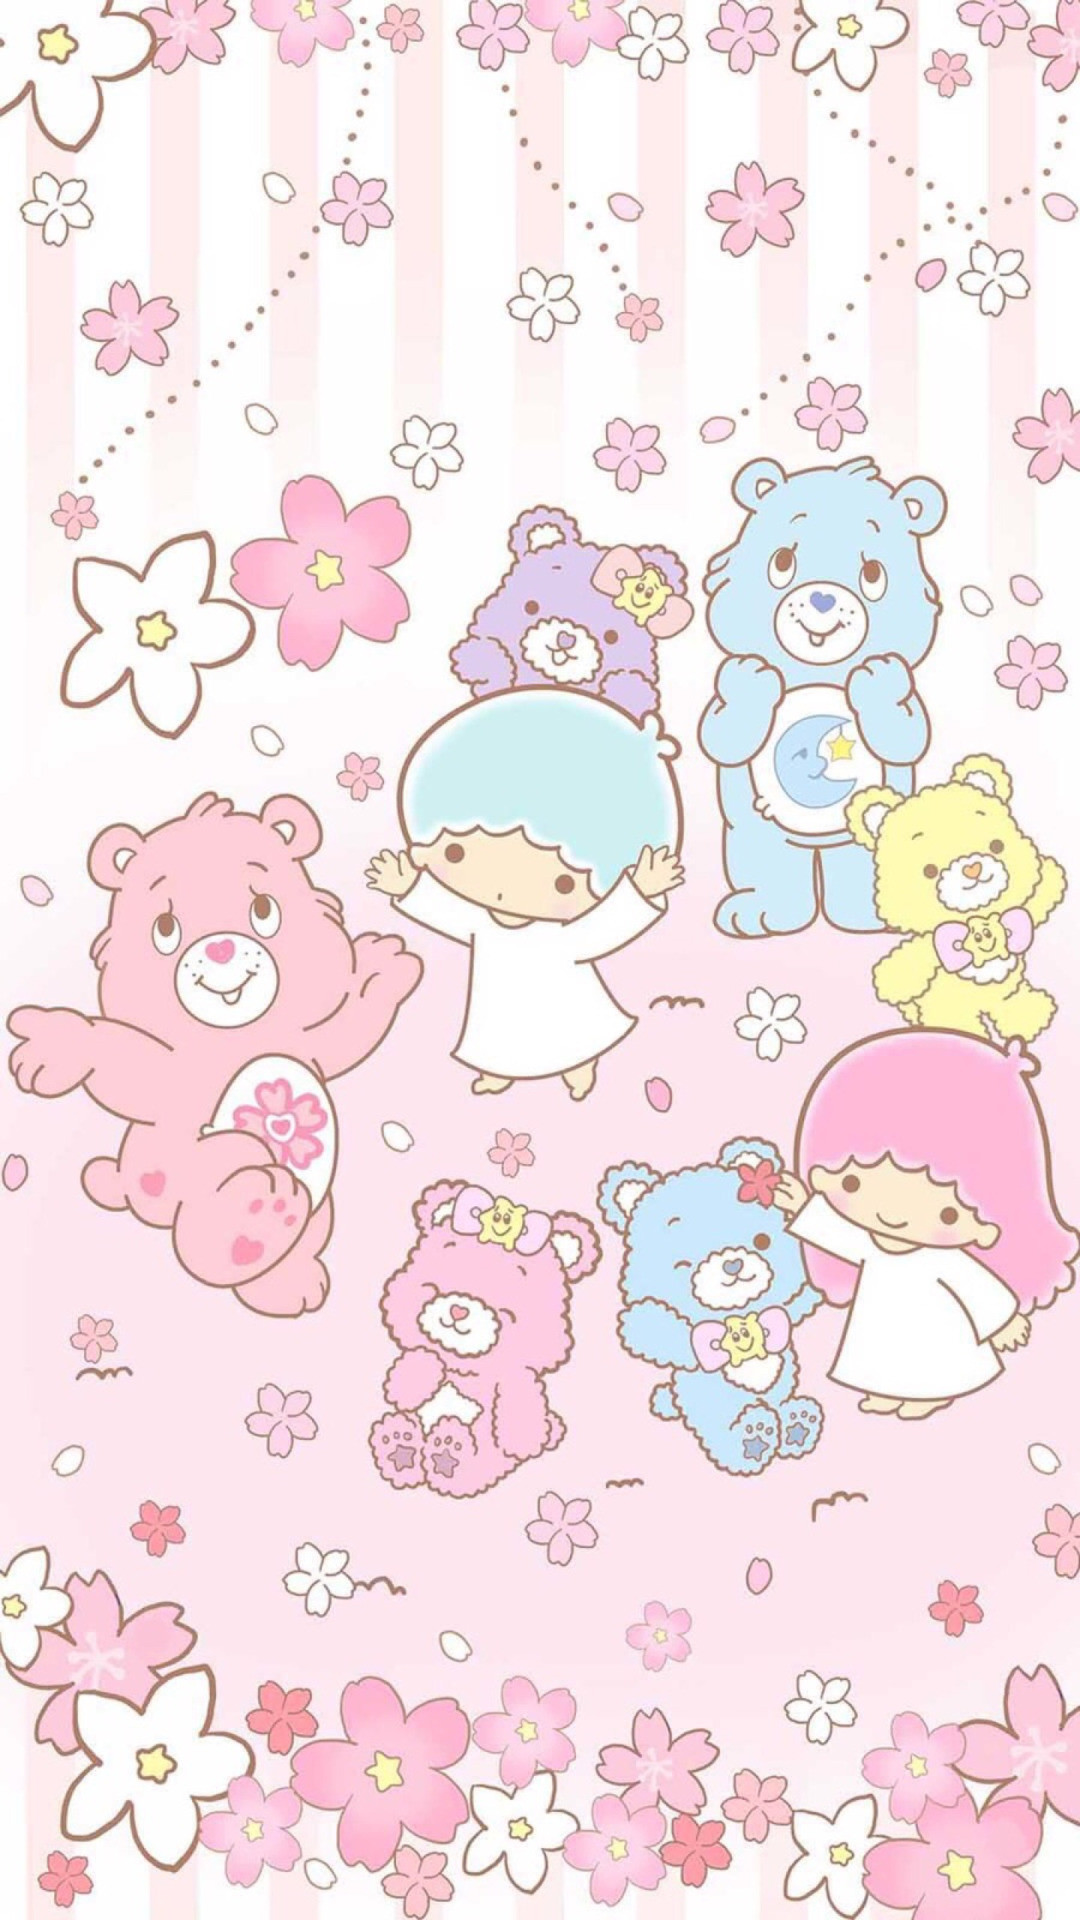 1080x1920 is this care bears meets sanrio?